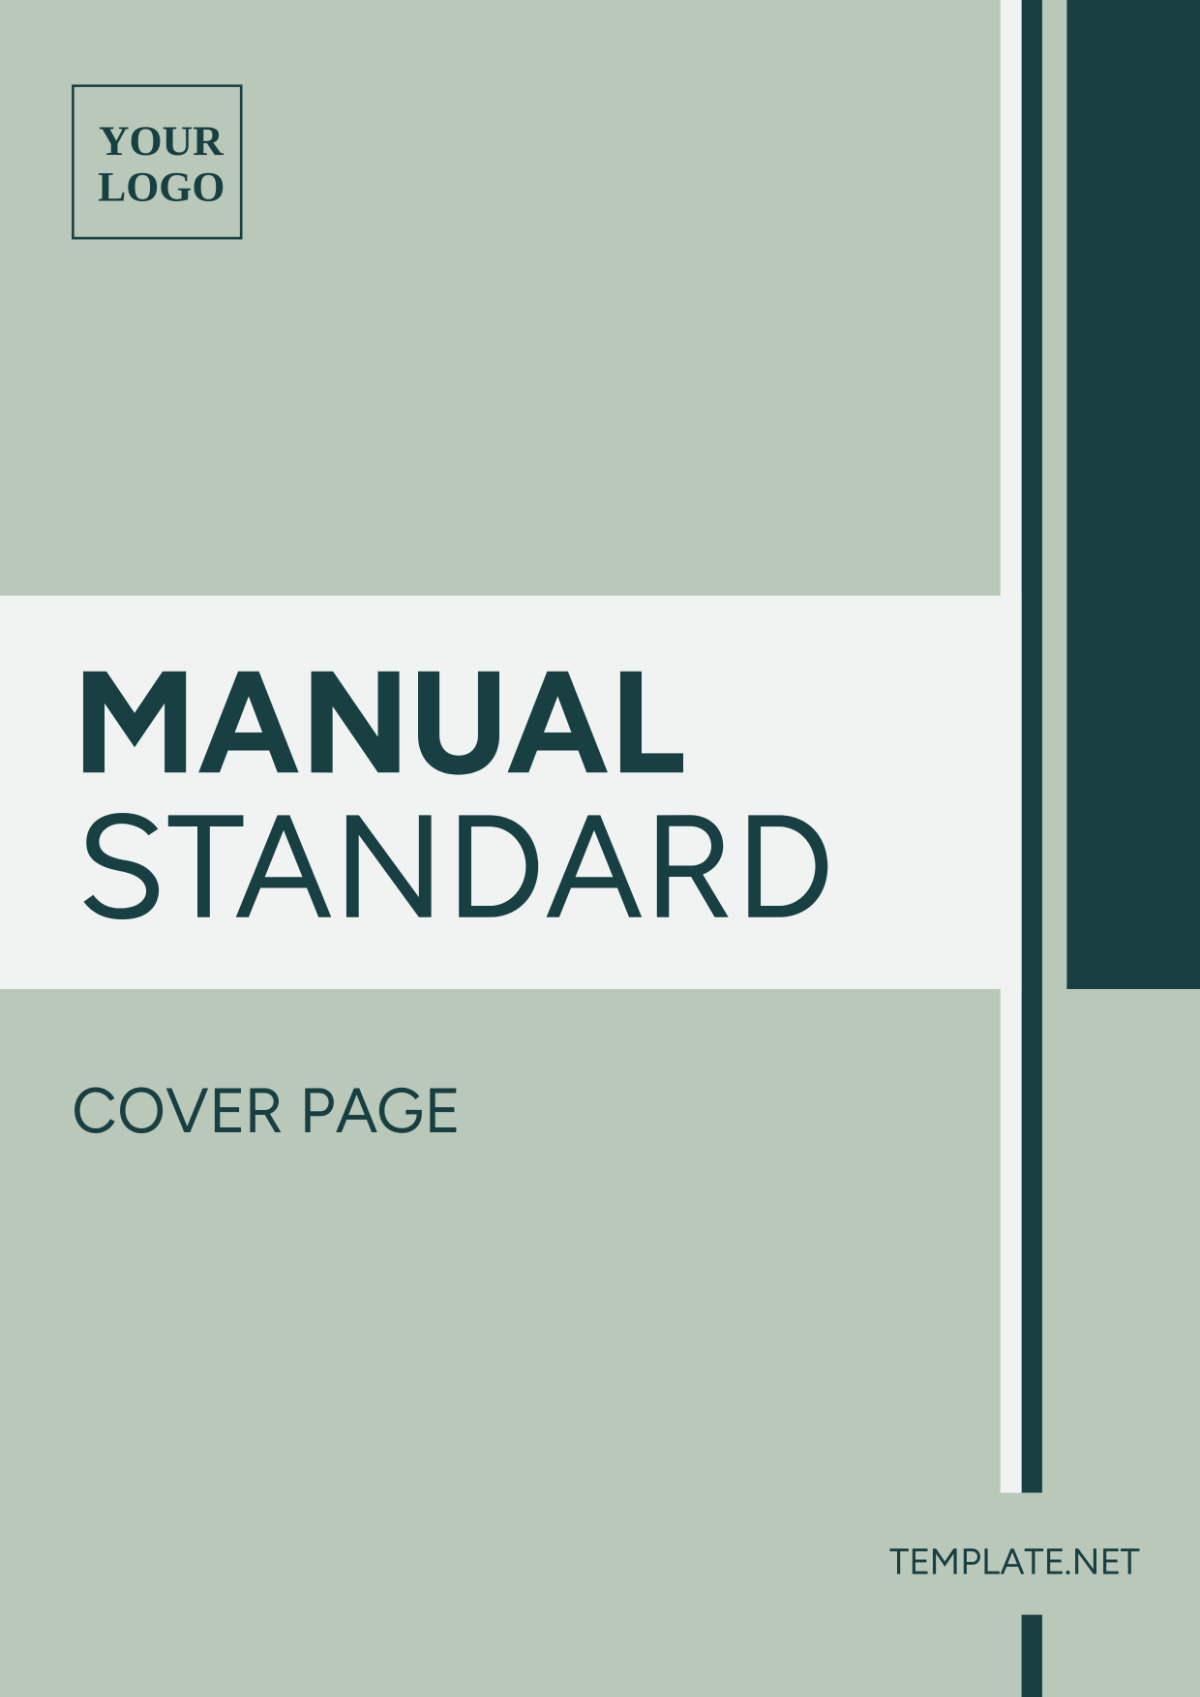 Manual Standard Cover Page